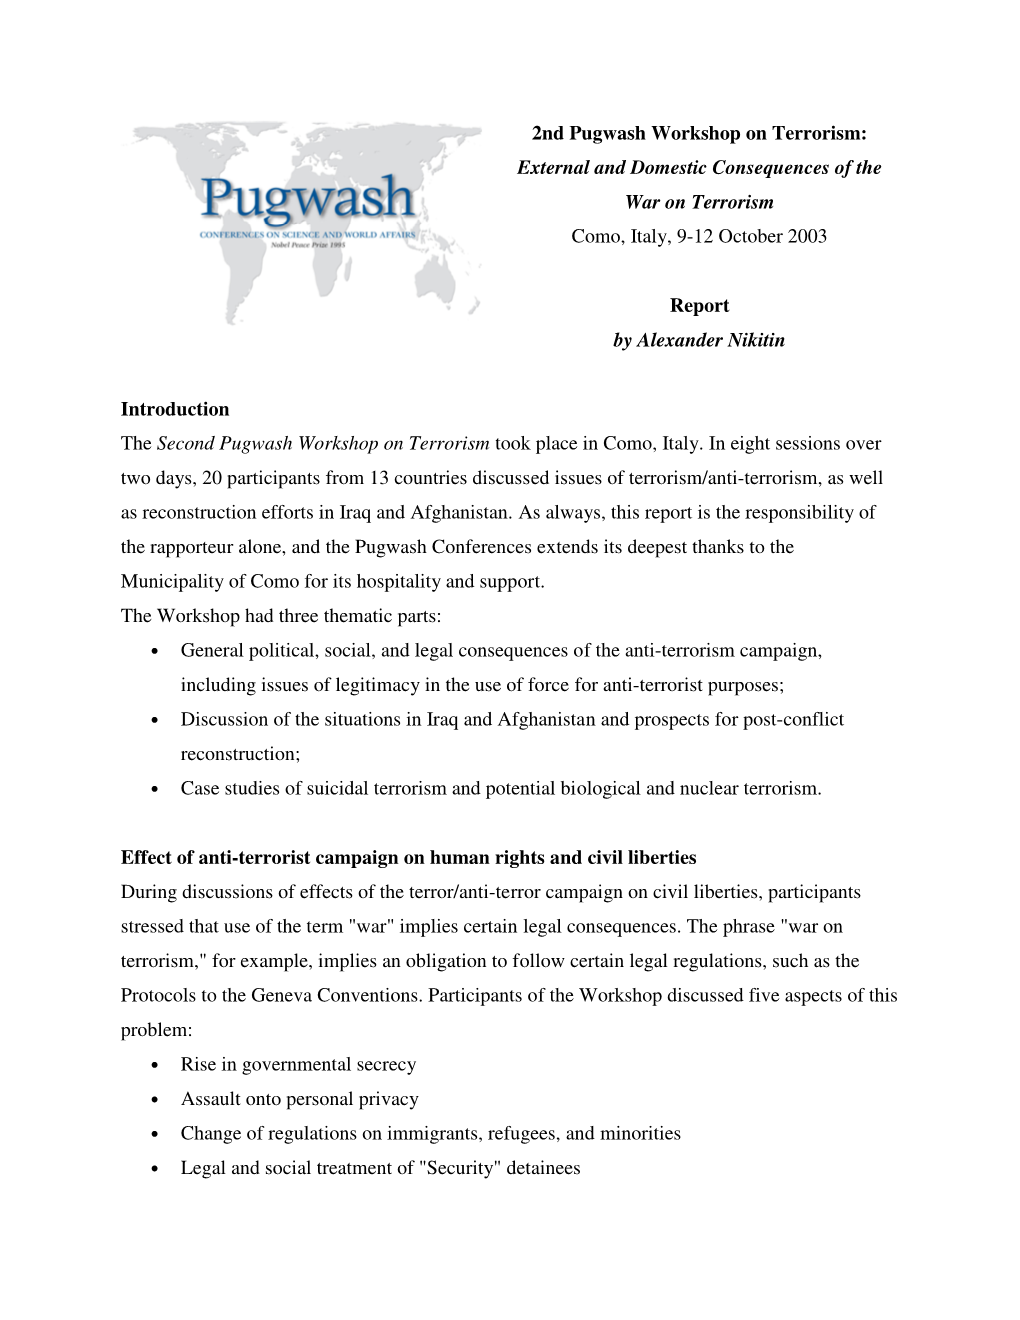 2Nd Pugwash Workshop on Terrorism: External and Domestic Consequences of the War on Terrorism Como, Italy, 9-12 October 2003